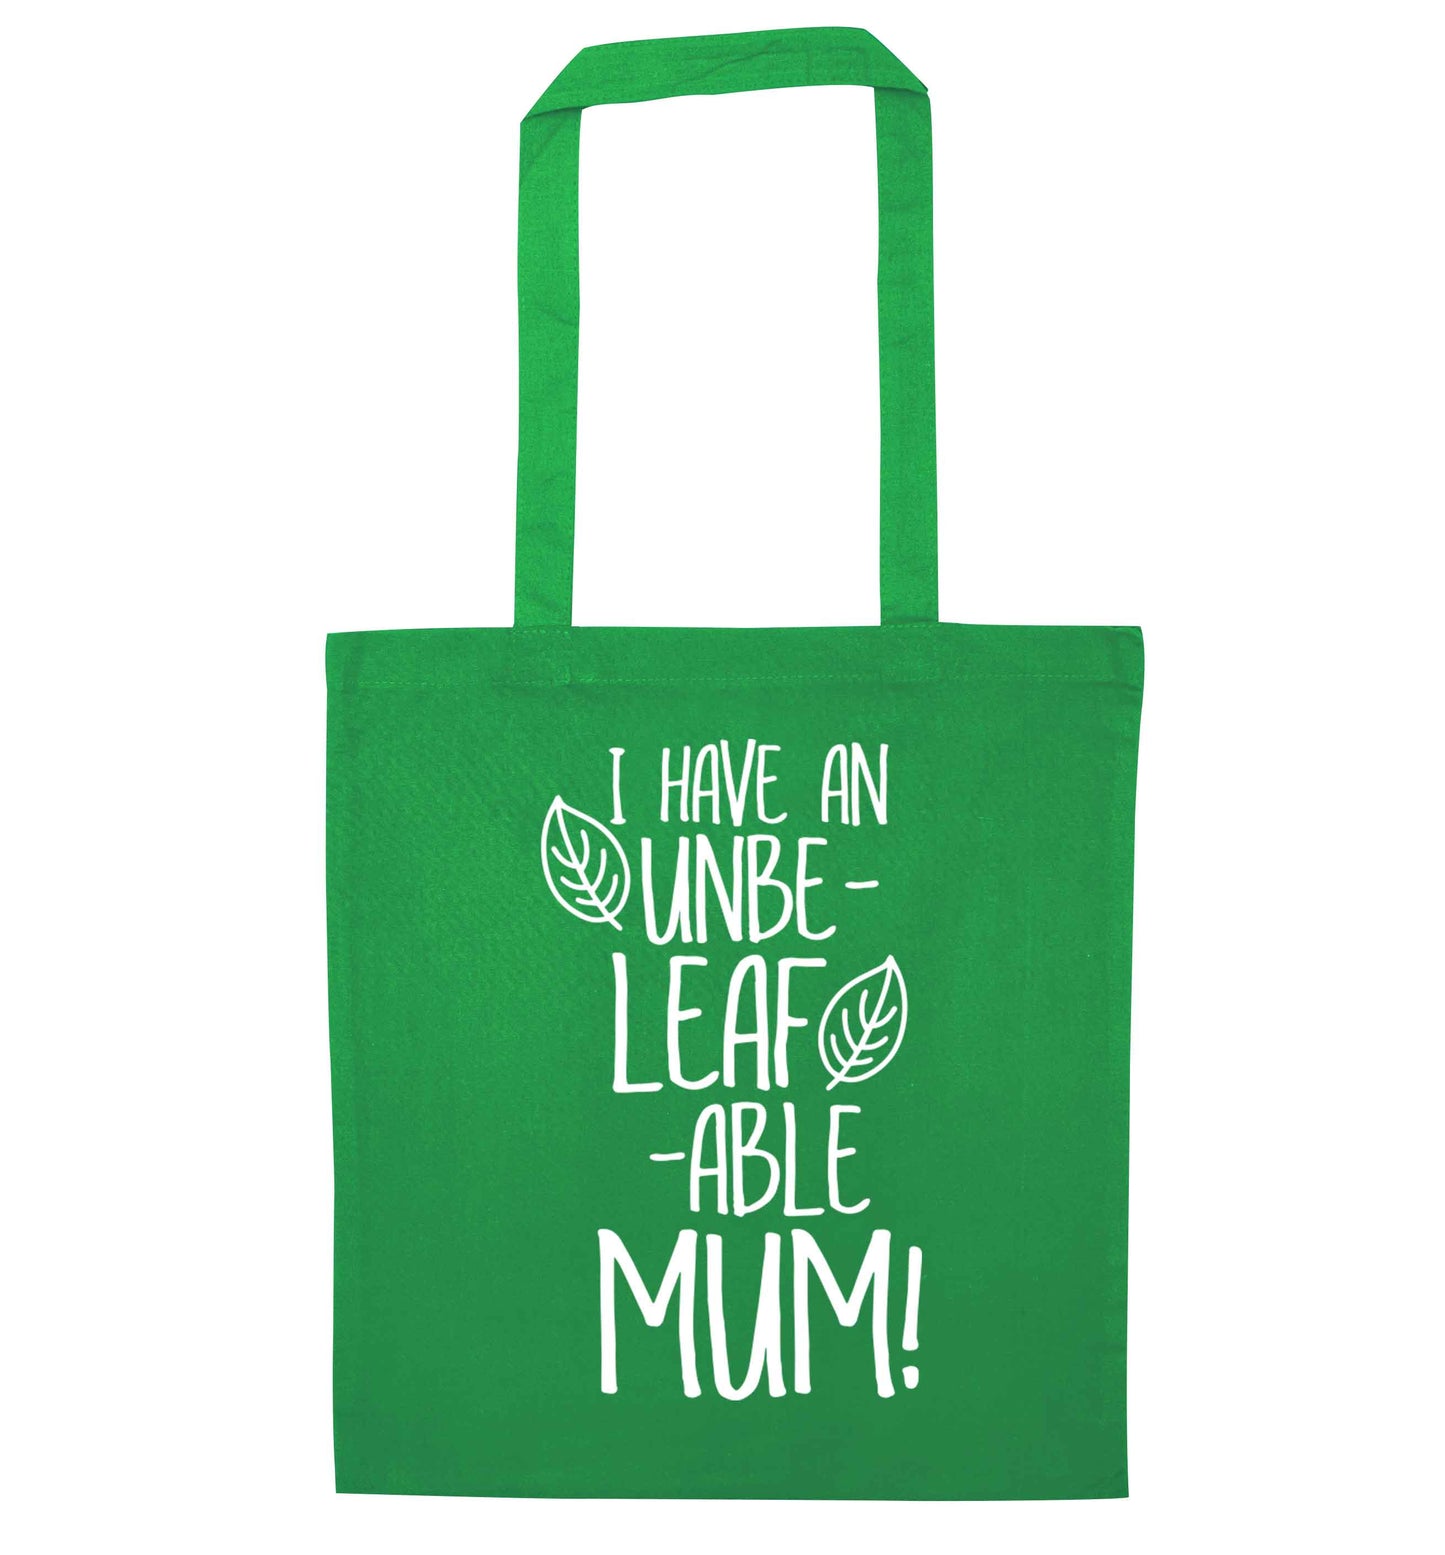 I have an unbeleafable mum! green tote bag